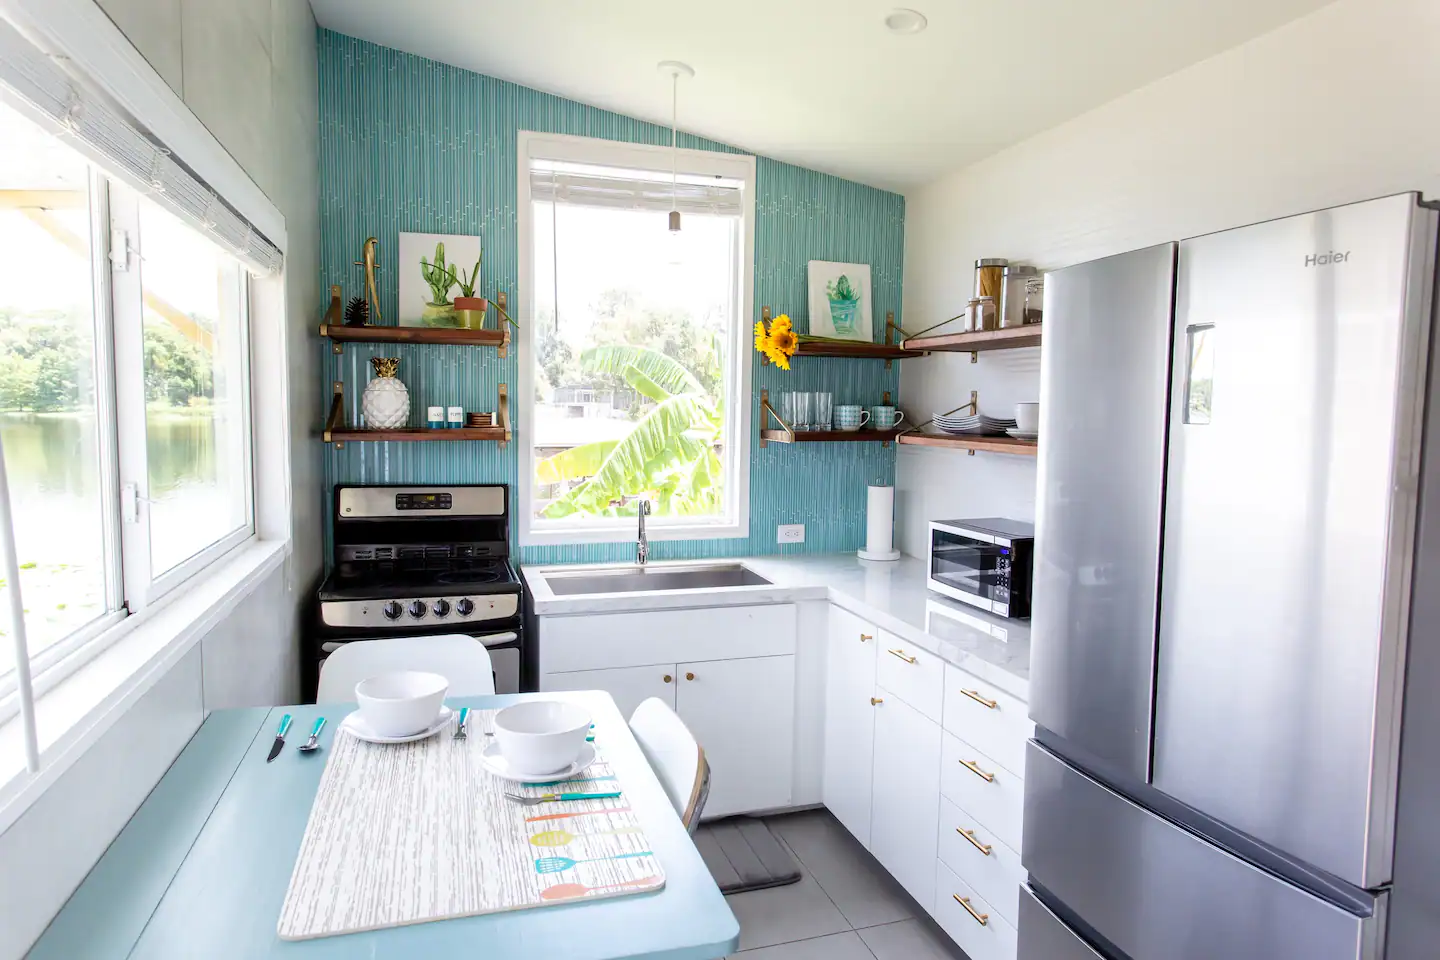 Kitchen is bright and tropical, with a full sink and oven.